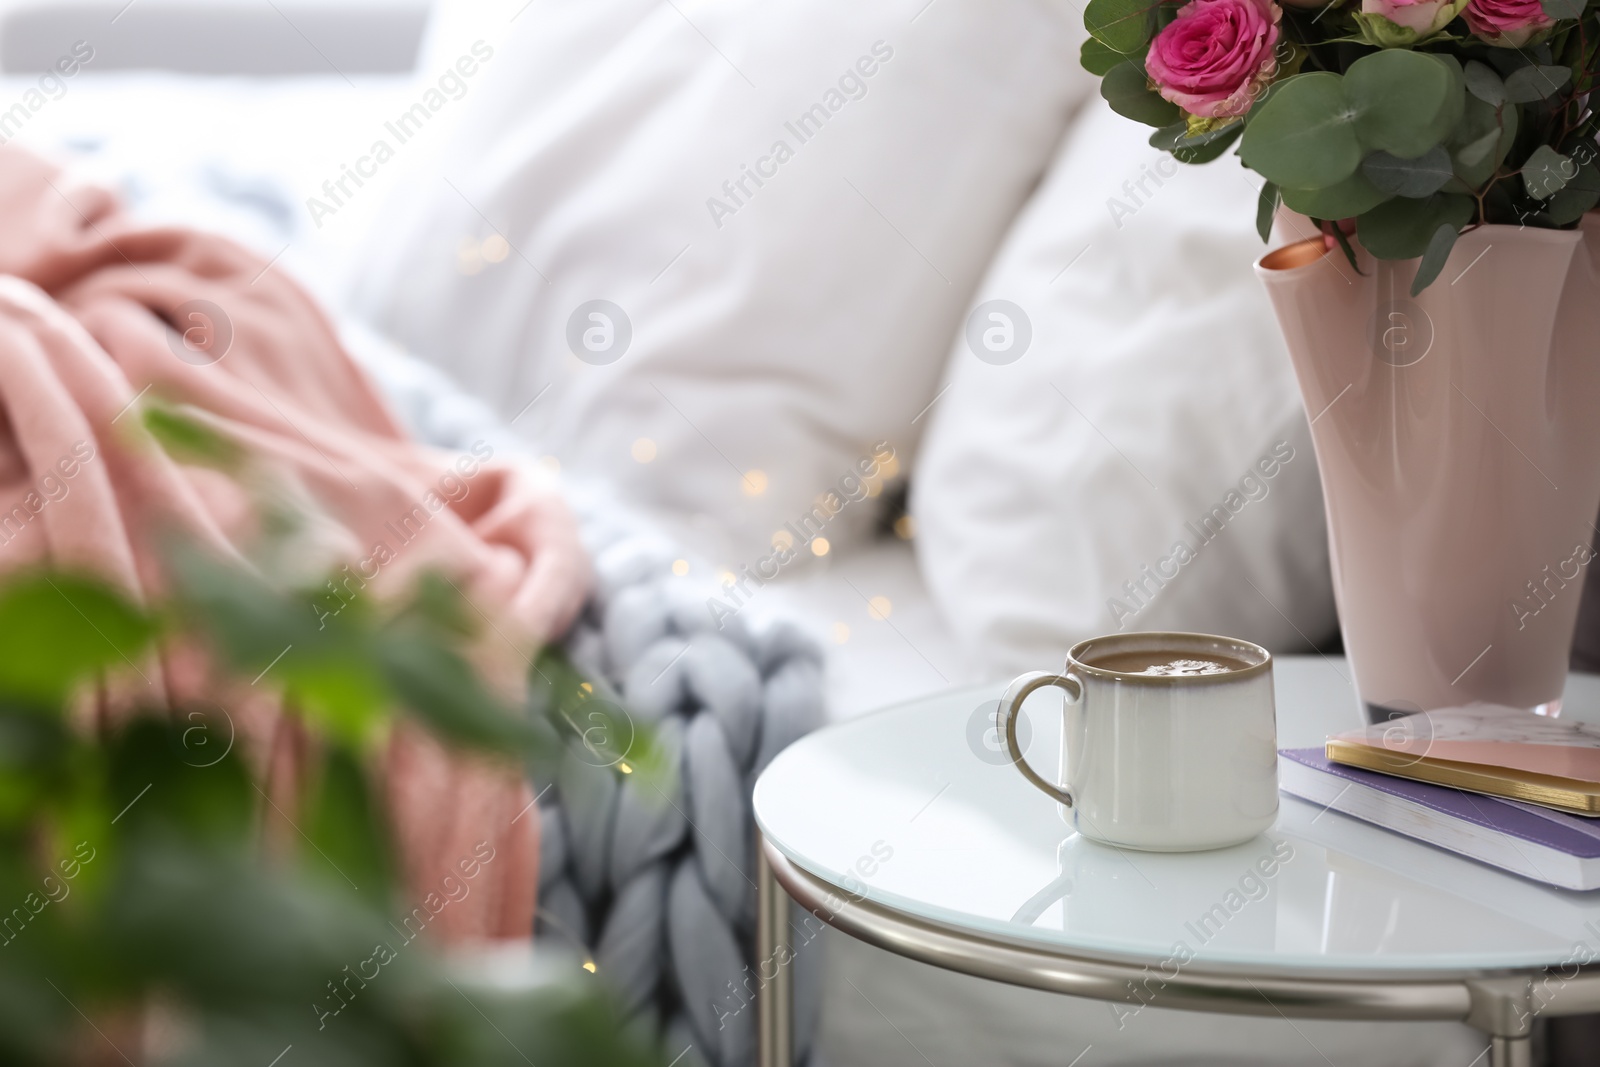 Photo of Cup of coffee and flowers on table near bed